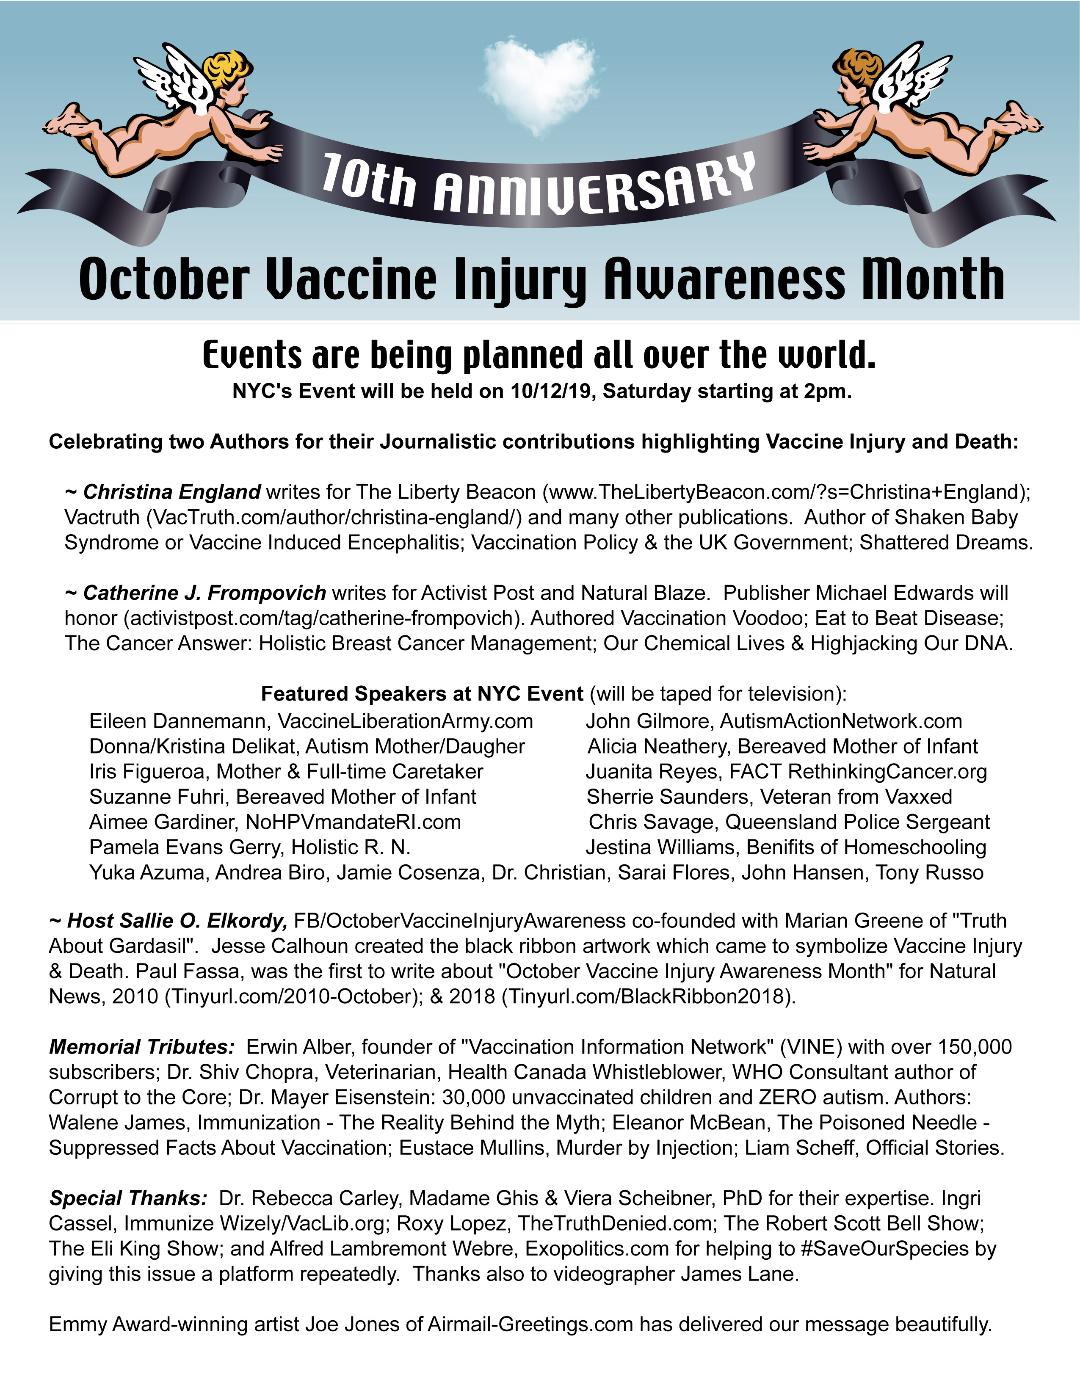 What Event are YOU planning for the 10th Anniversary of OCTOBER Vaccine Injury Awareness Month? ~ NYC Event 10/12/19